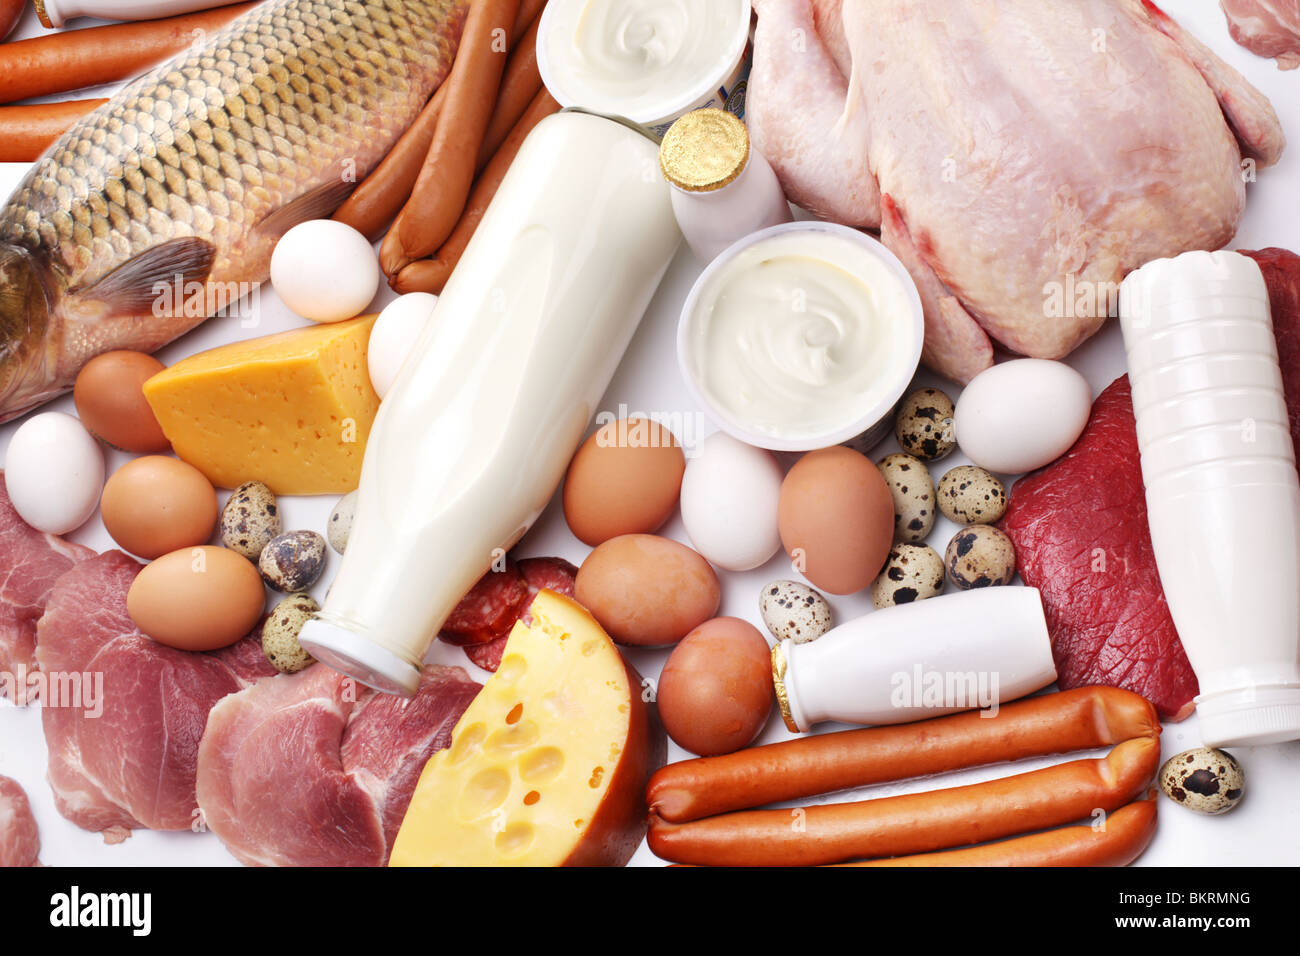 Fresh meat and dairy products. Stock Photo